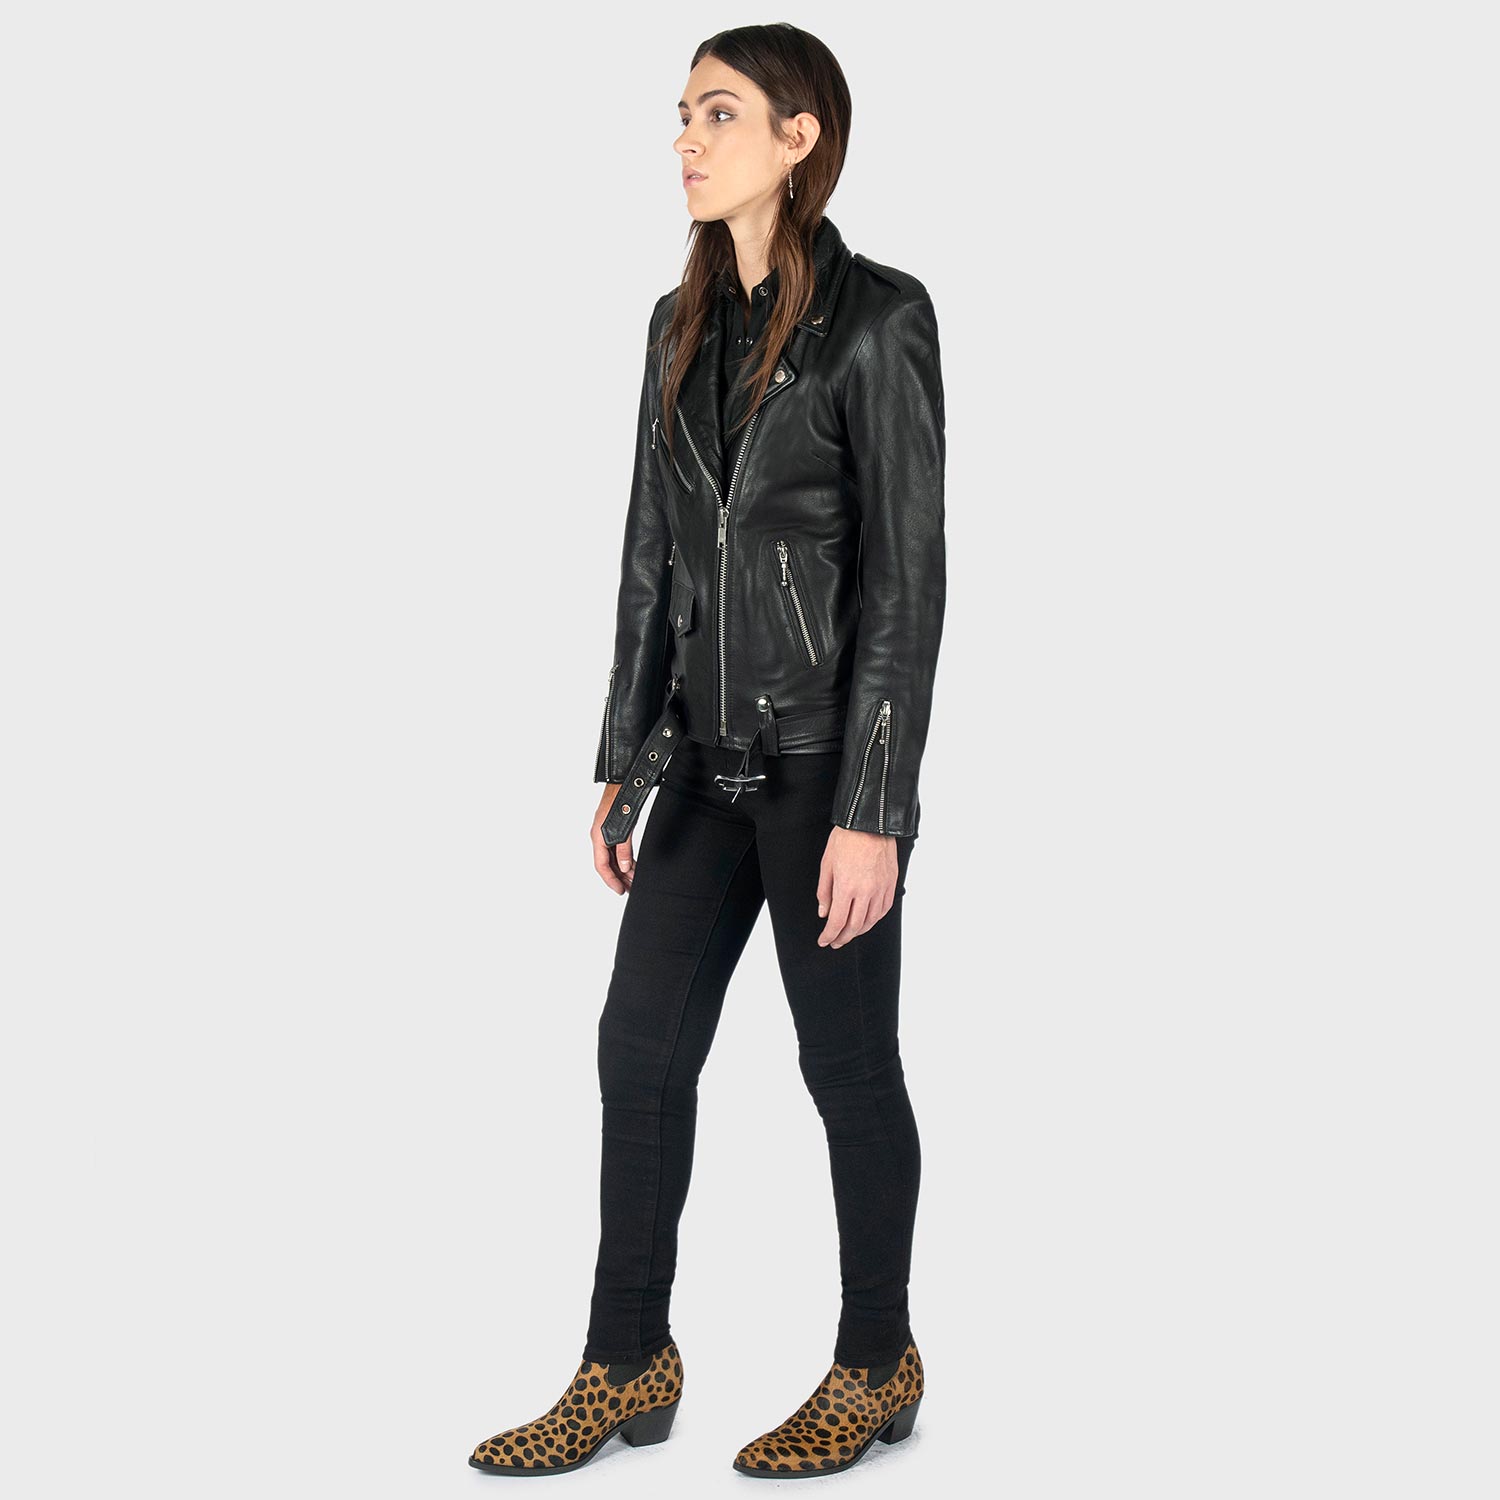 To Black Jacket Oversized Leather and Nickel Apparel Straight Hell Commando - |